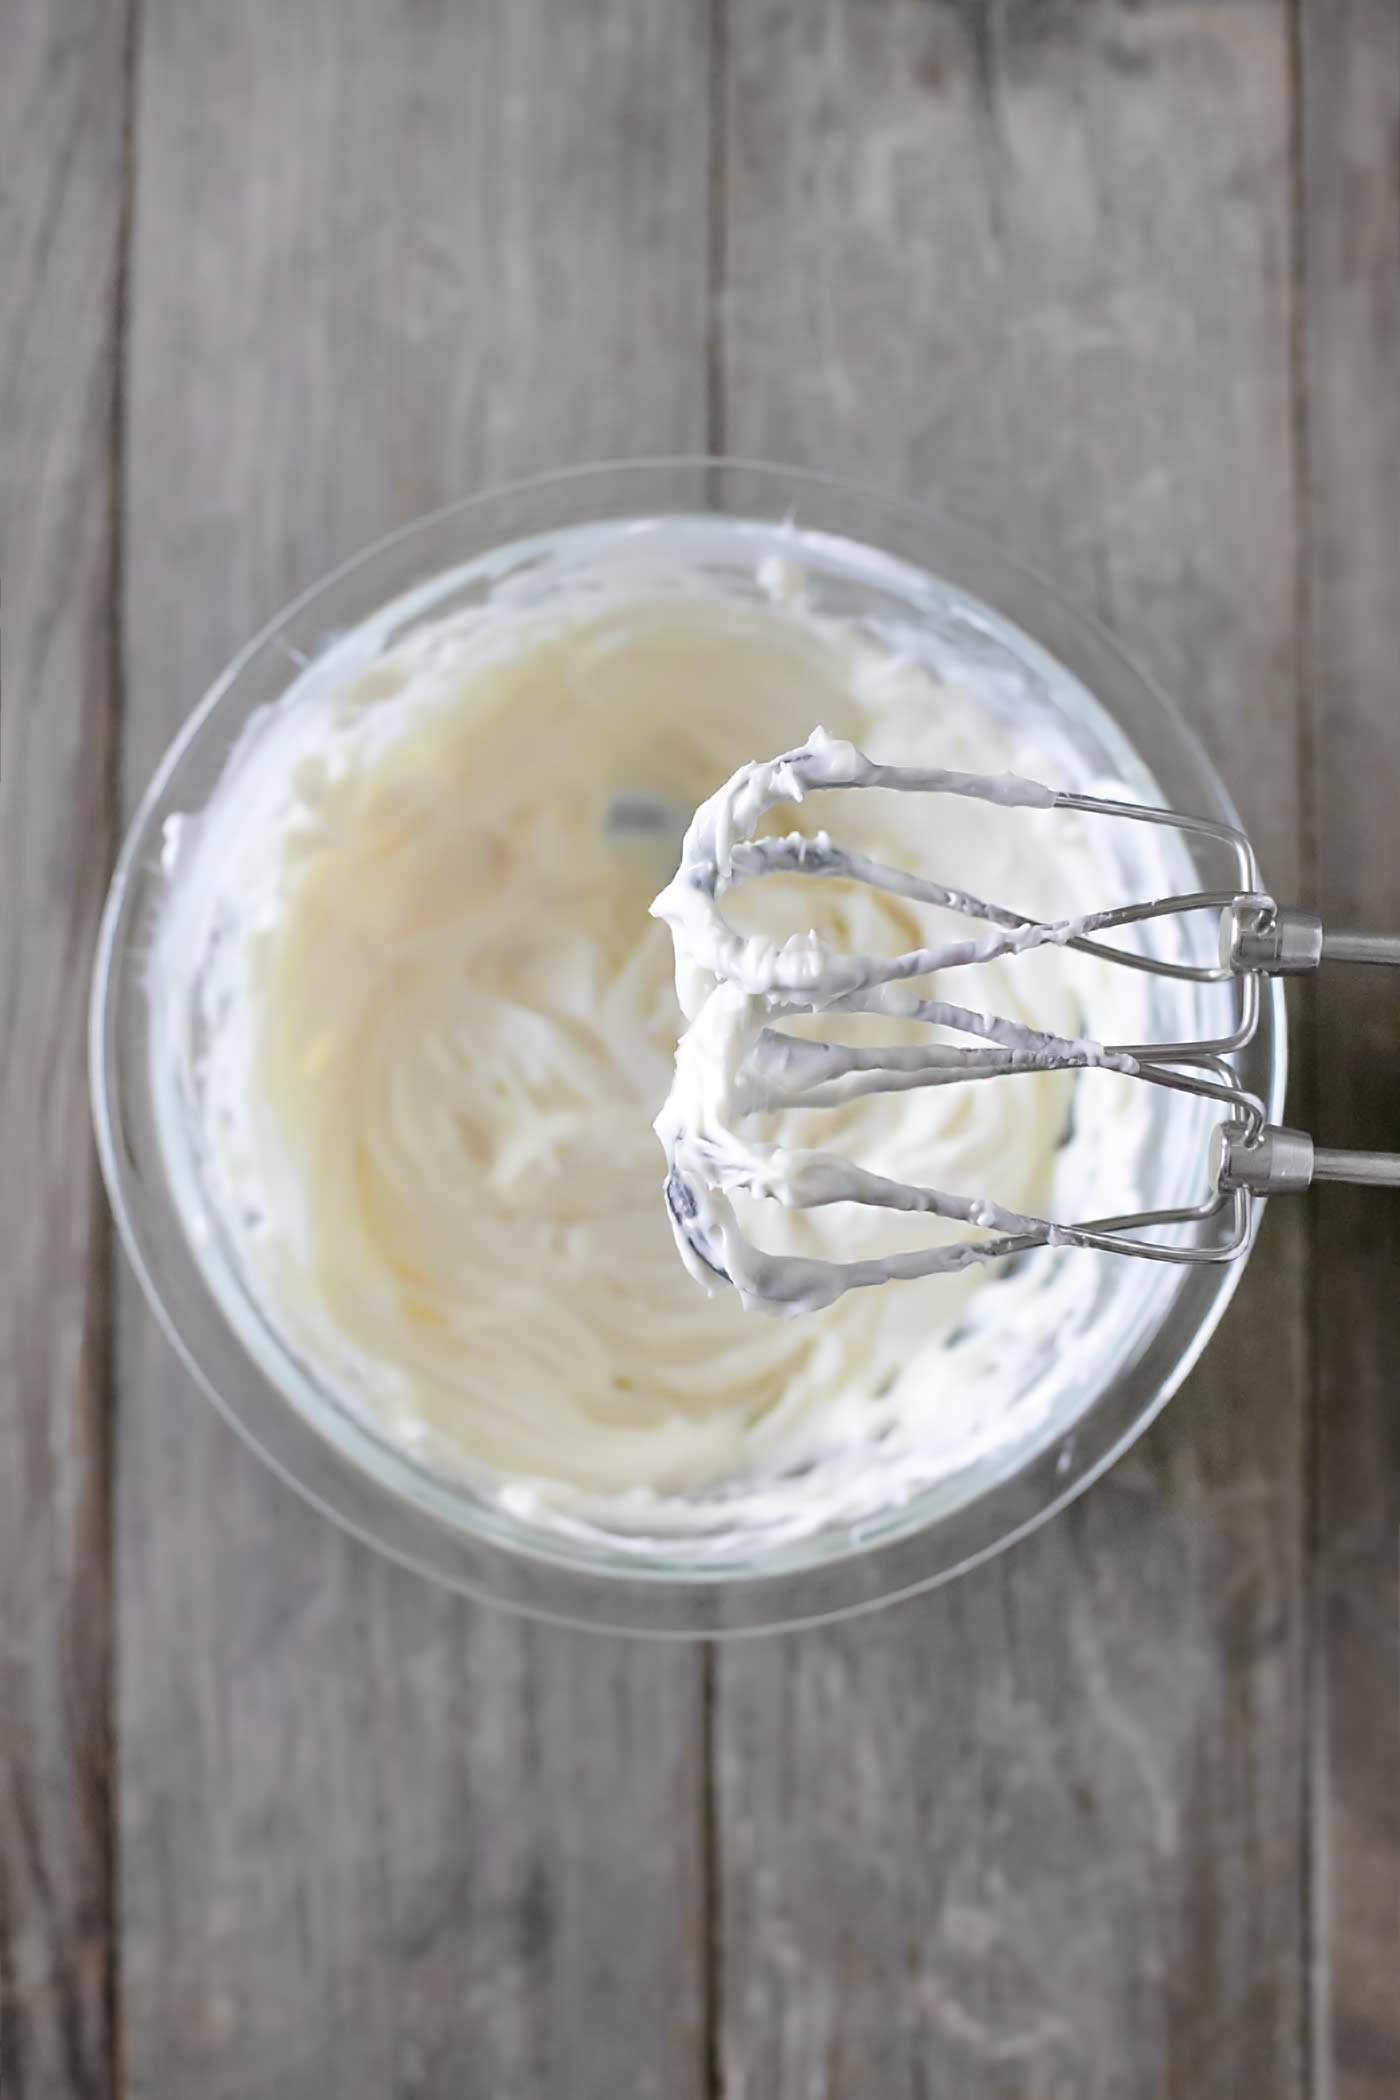 Mixing cream cheese and fluff with a hand mixer